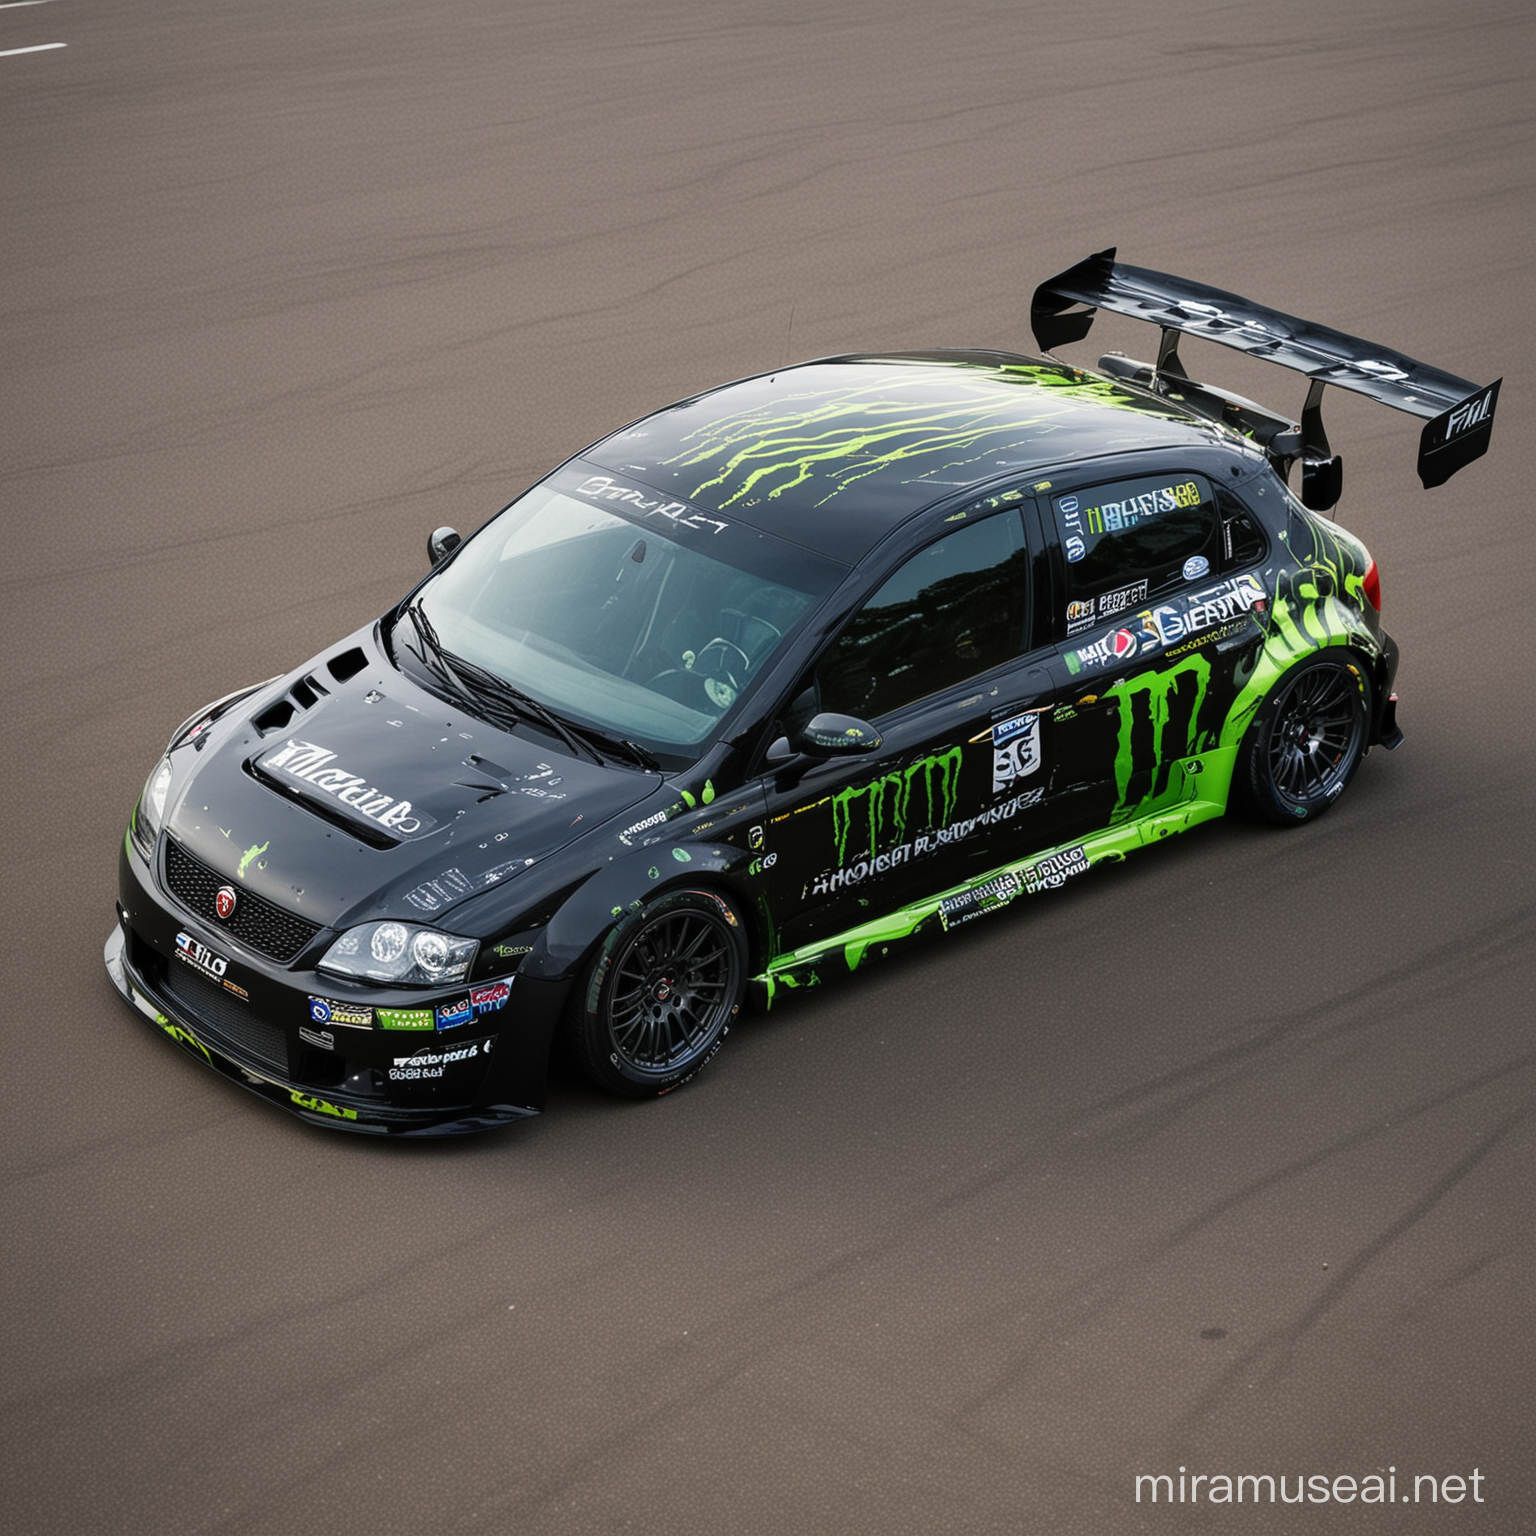 Fiat Stilo as racing car include monster energy painting 